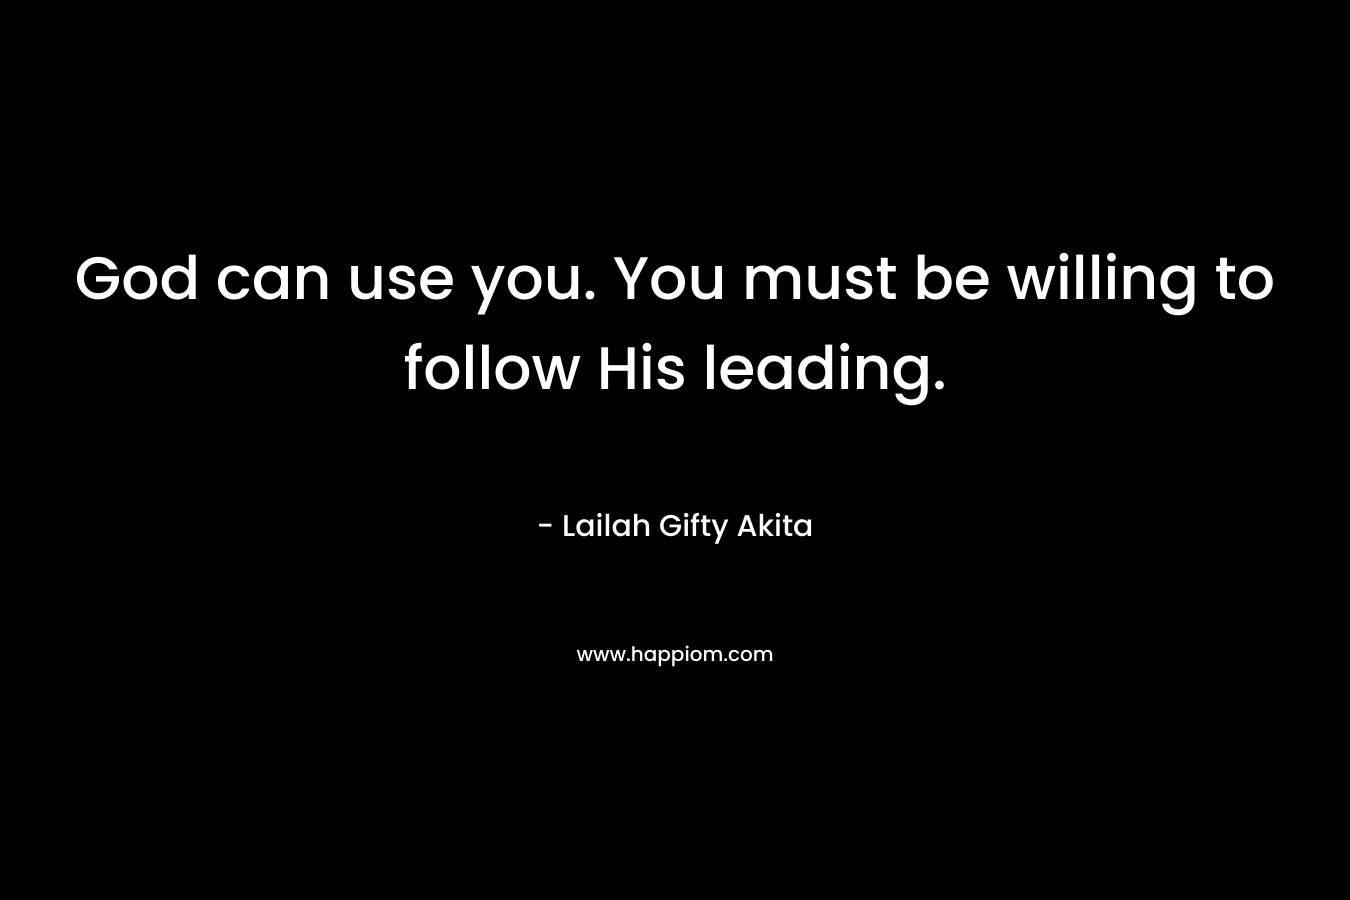 God can use you. You must be willing to follow His leading.